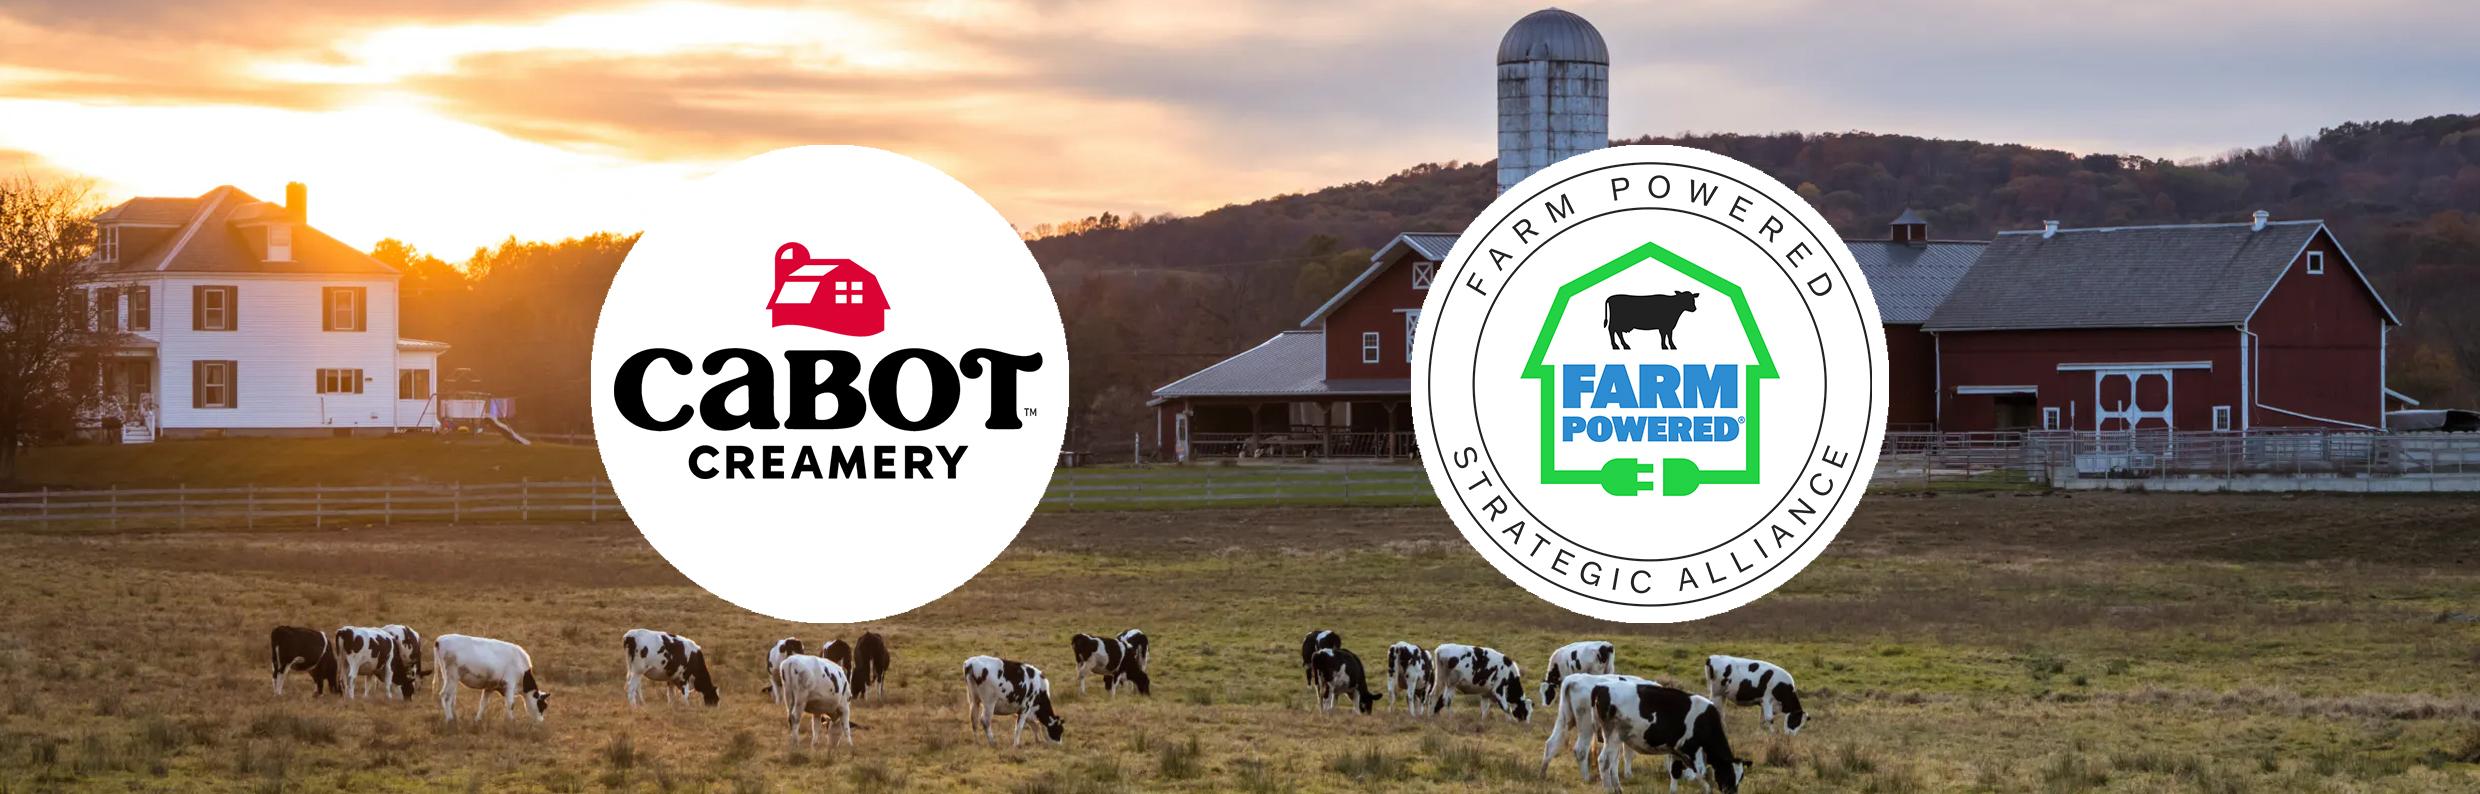 Logos of Cabot Creamery and Farm Powered Strategic Alliance, with a background image of a farm using anaerobic digestion